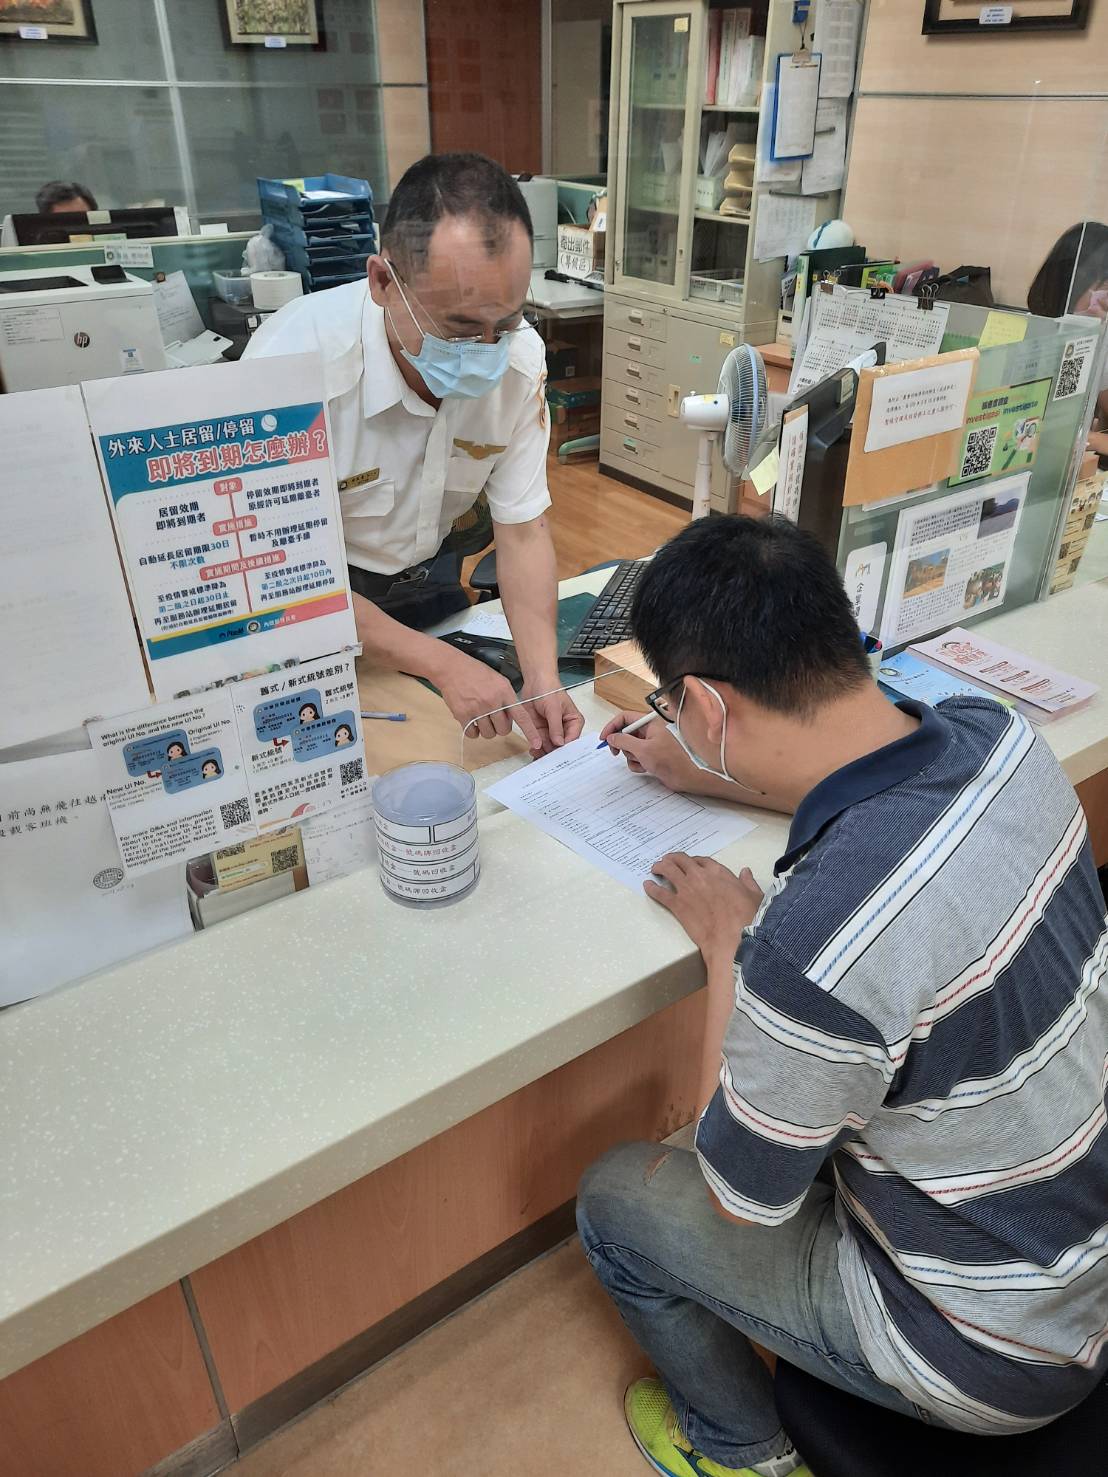 The public knows that foreigners who apply for a unified ID number may register online and make an appointment for vaccination, and may also go to the service station to help their family members apply. (Photo/Provided by Chiayi City Service Station)